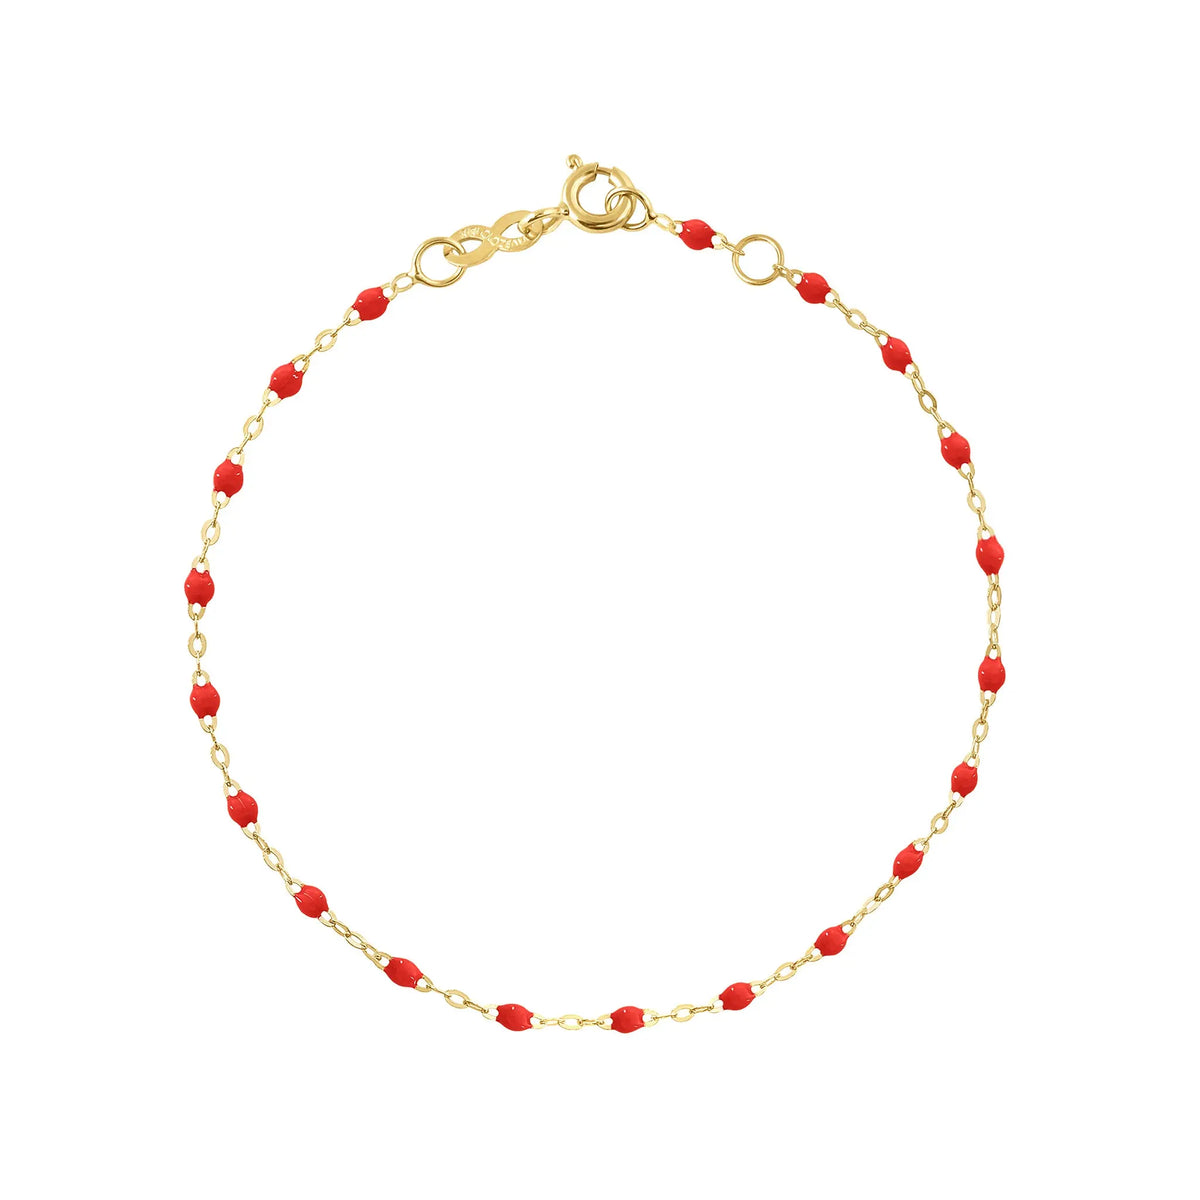 The Classic Gigi bracelet by gigi CLOZEAU features 18K Yellow Gold, and unique Poppy jewels for a simple, everyday look.   Each jewel is unique, artisanally made in their family-owned workshop. 18K yellow gold and resin. The bracelet measures 6.7 inches with adjustable clasp at 6.3 inches.